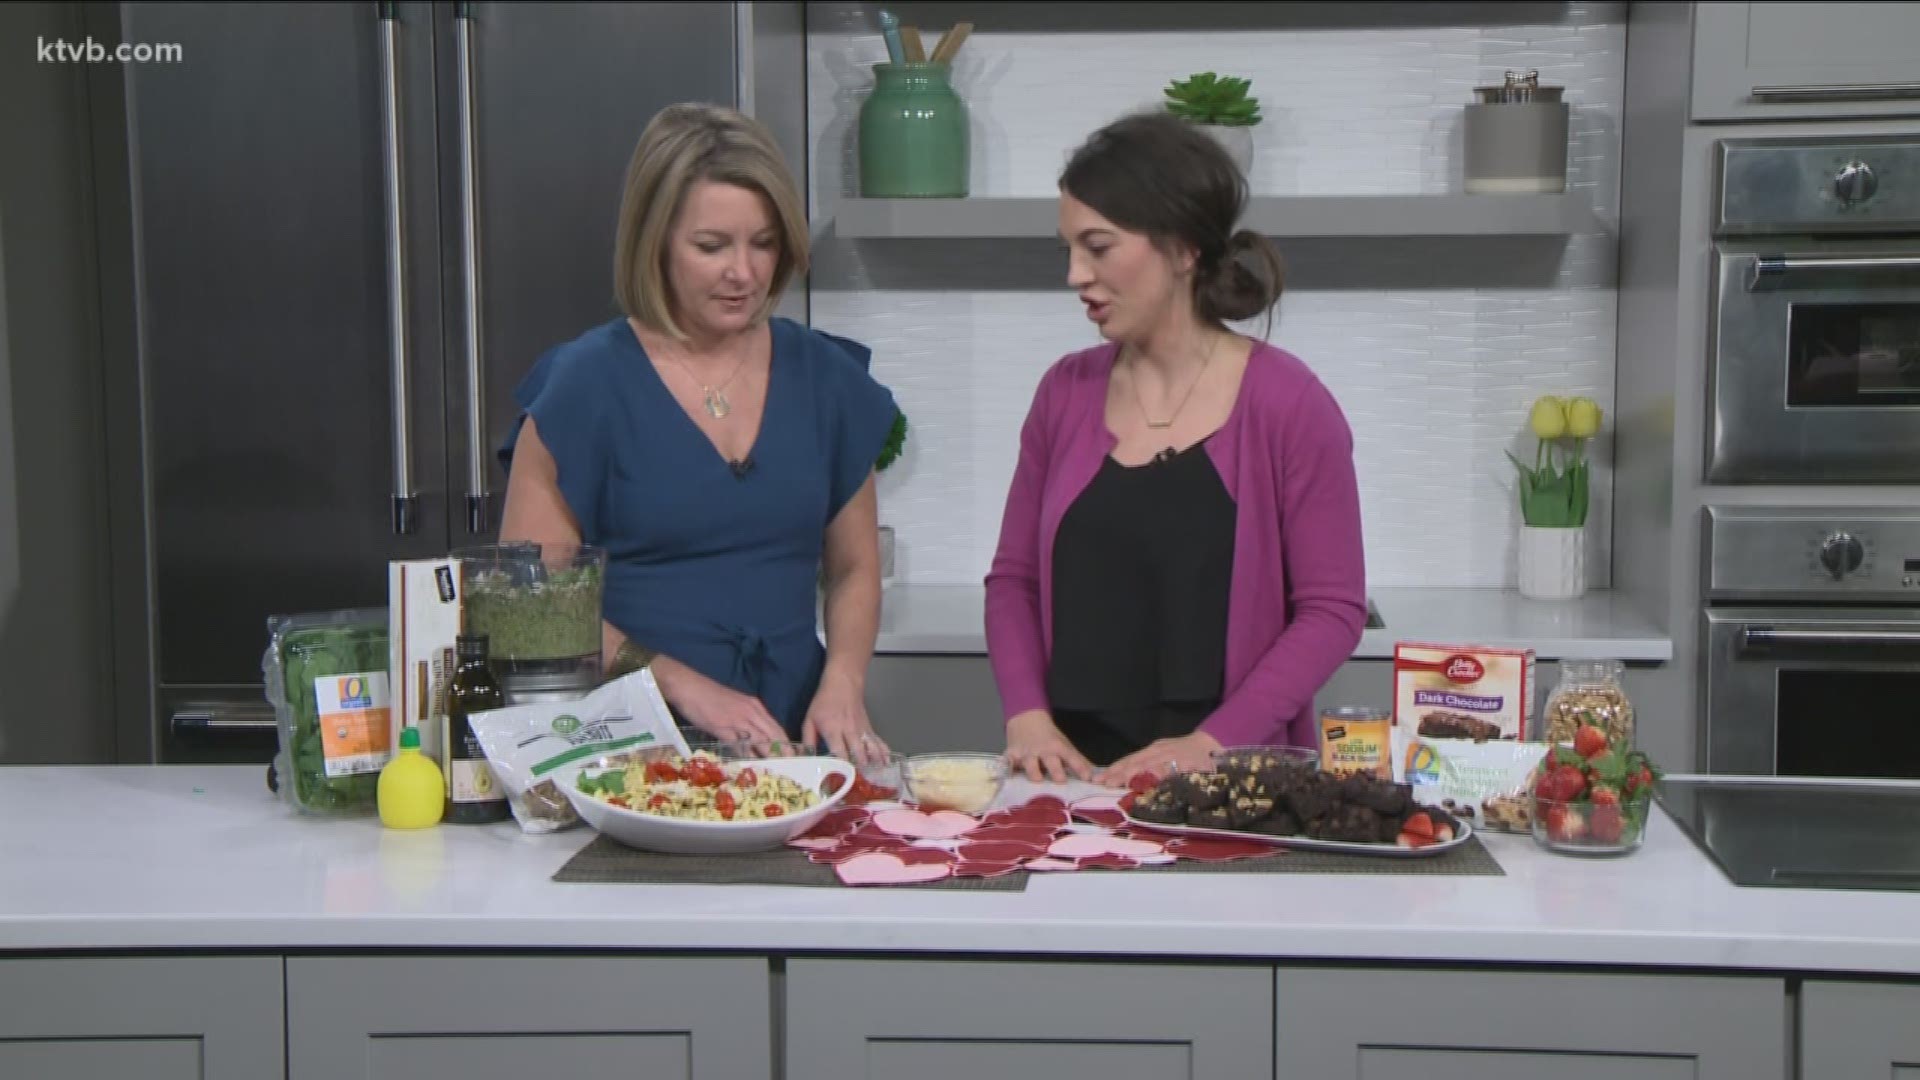 Dietitian Molly Tevis has two healthy recipes you can make at home.